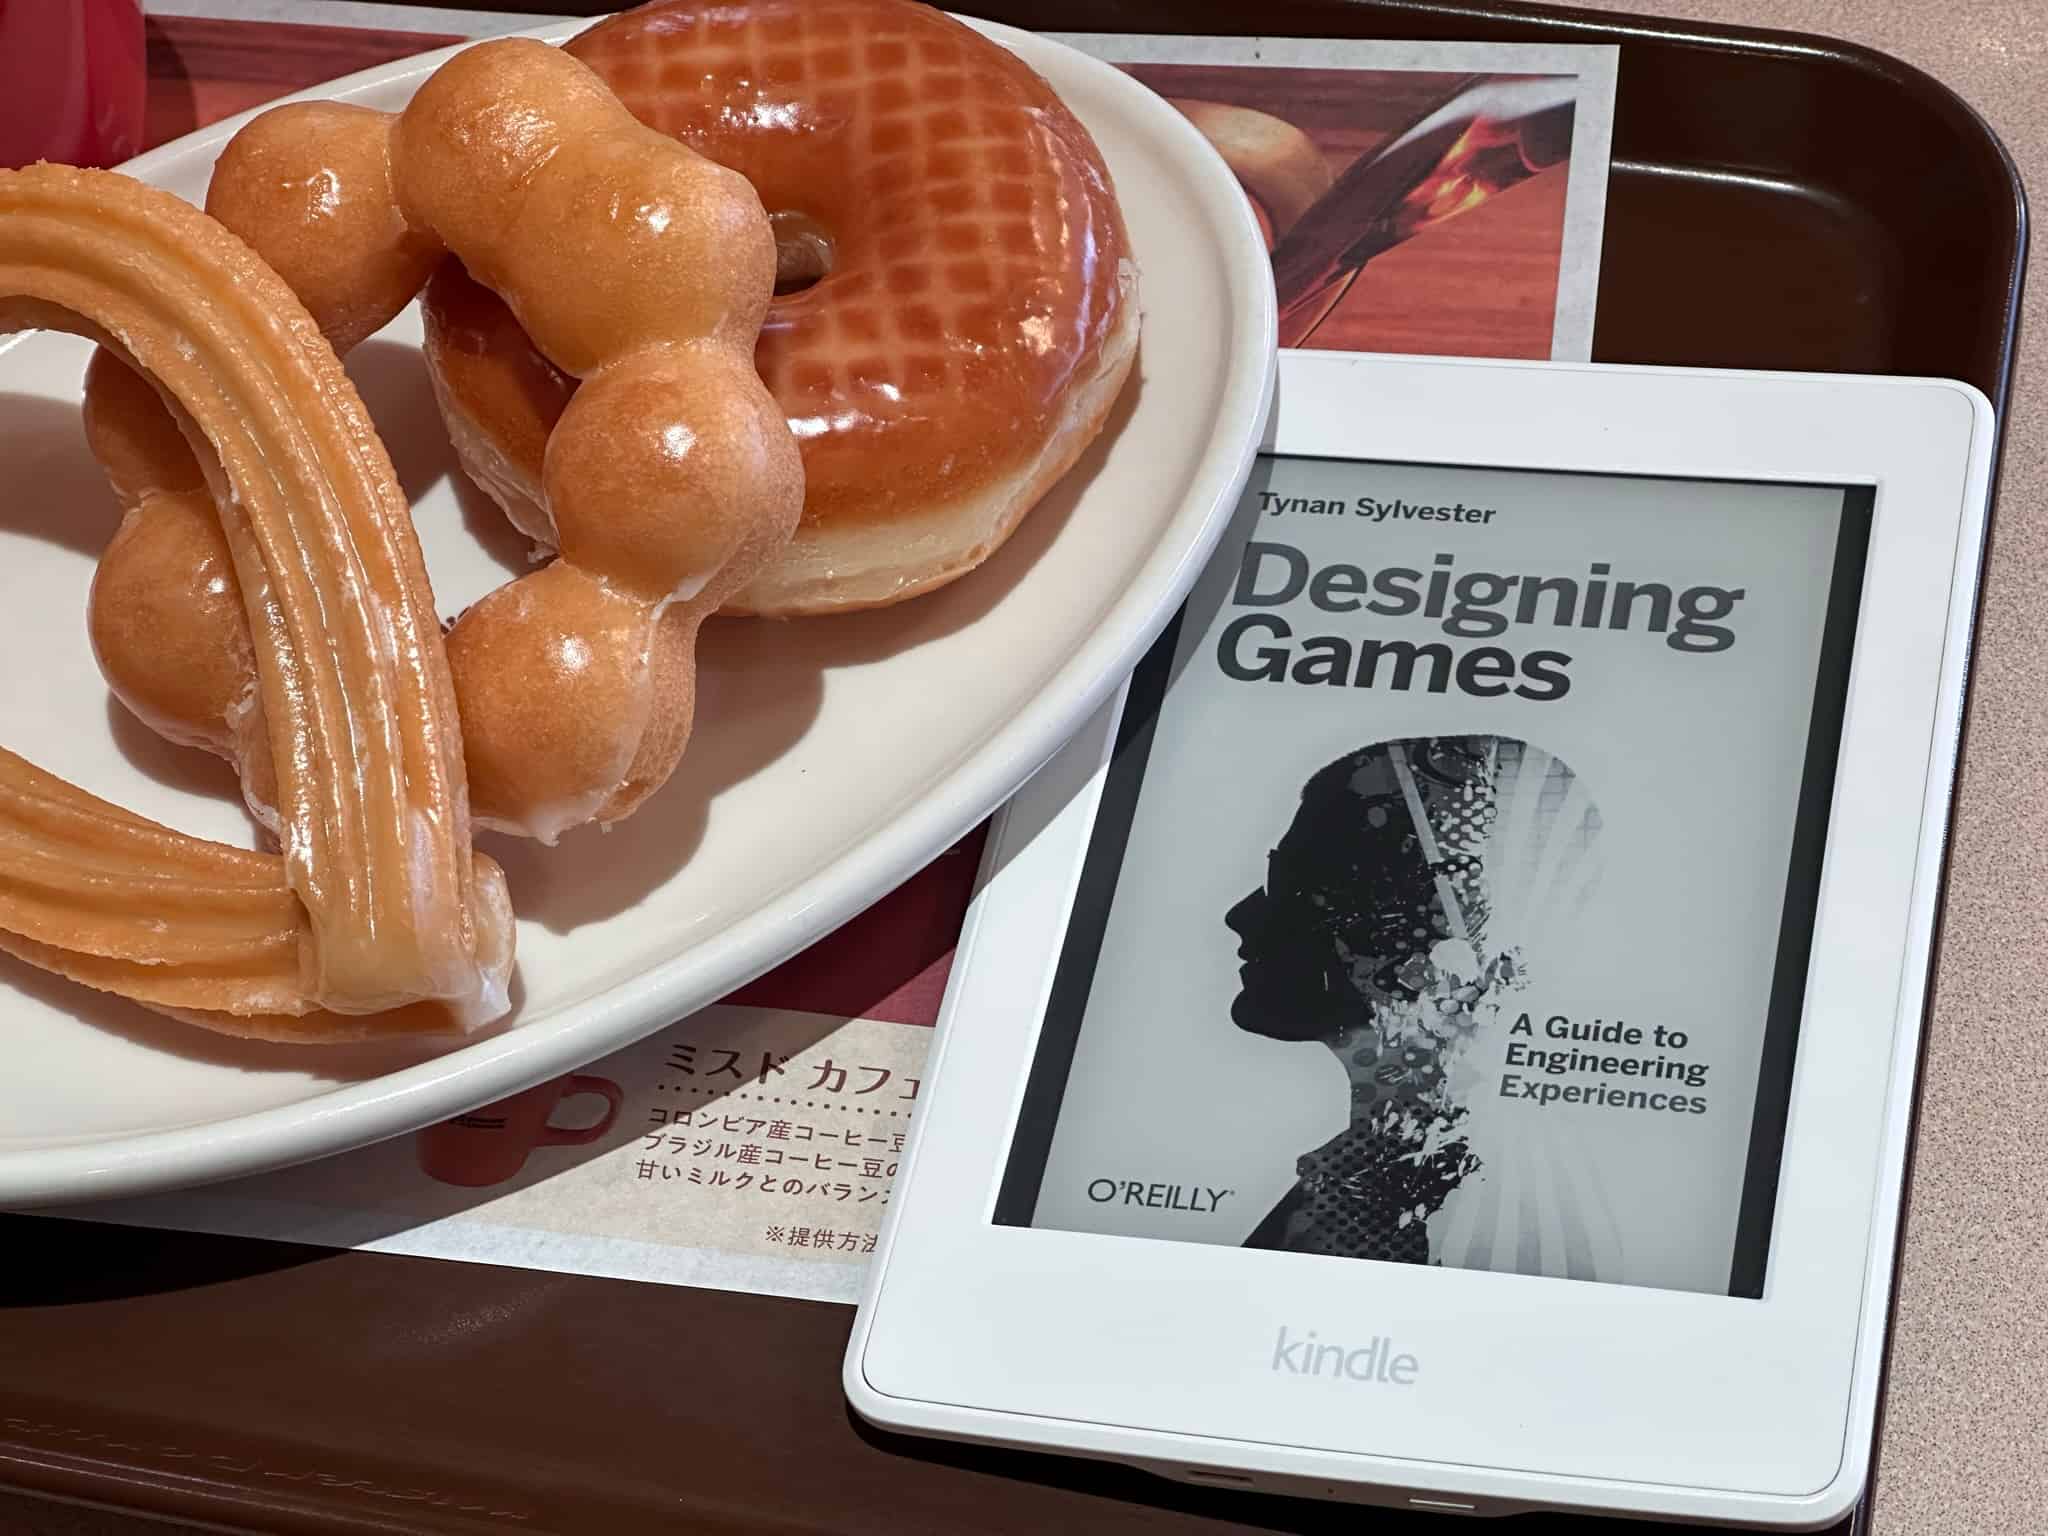 A Kindle e-reader displaying the cover of Designing Games by Tynan Sylvester rests on a tray next to a plate of donuts, including a glazed and a churro, symbolizing a relaxing read with breakfast for game developers looking towards 2024